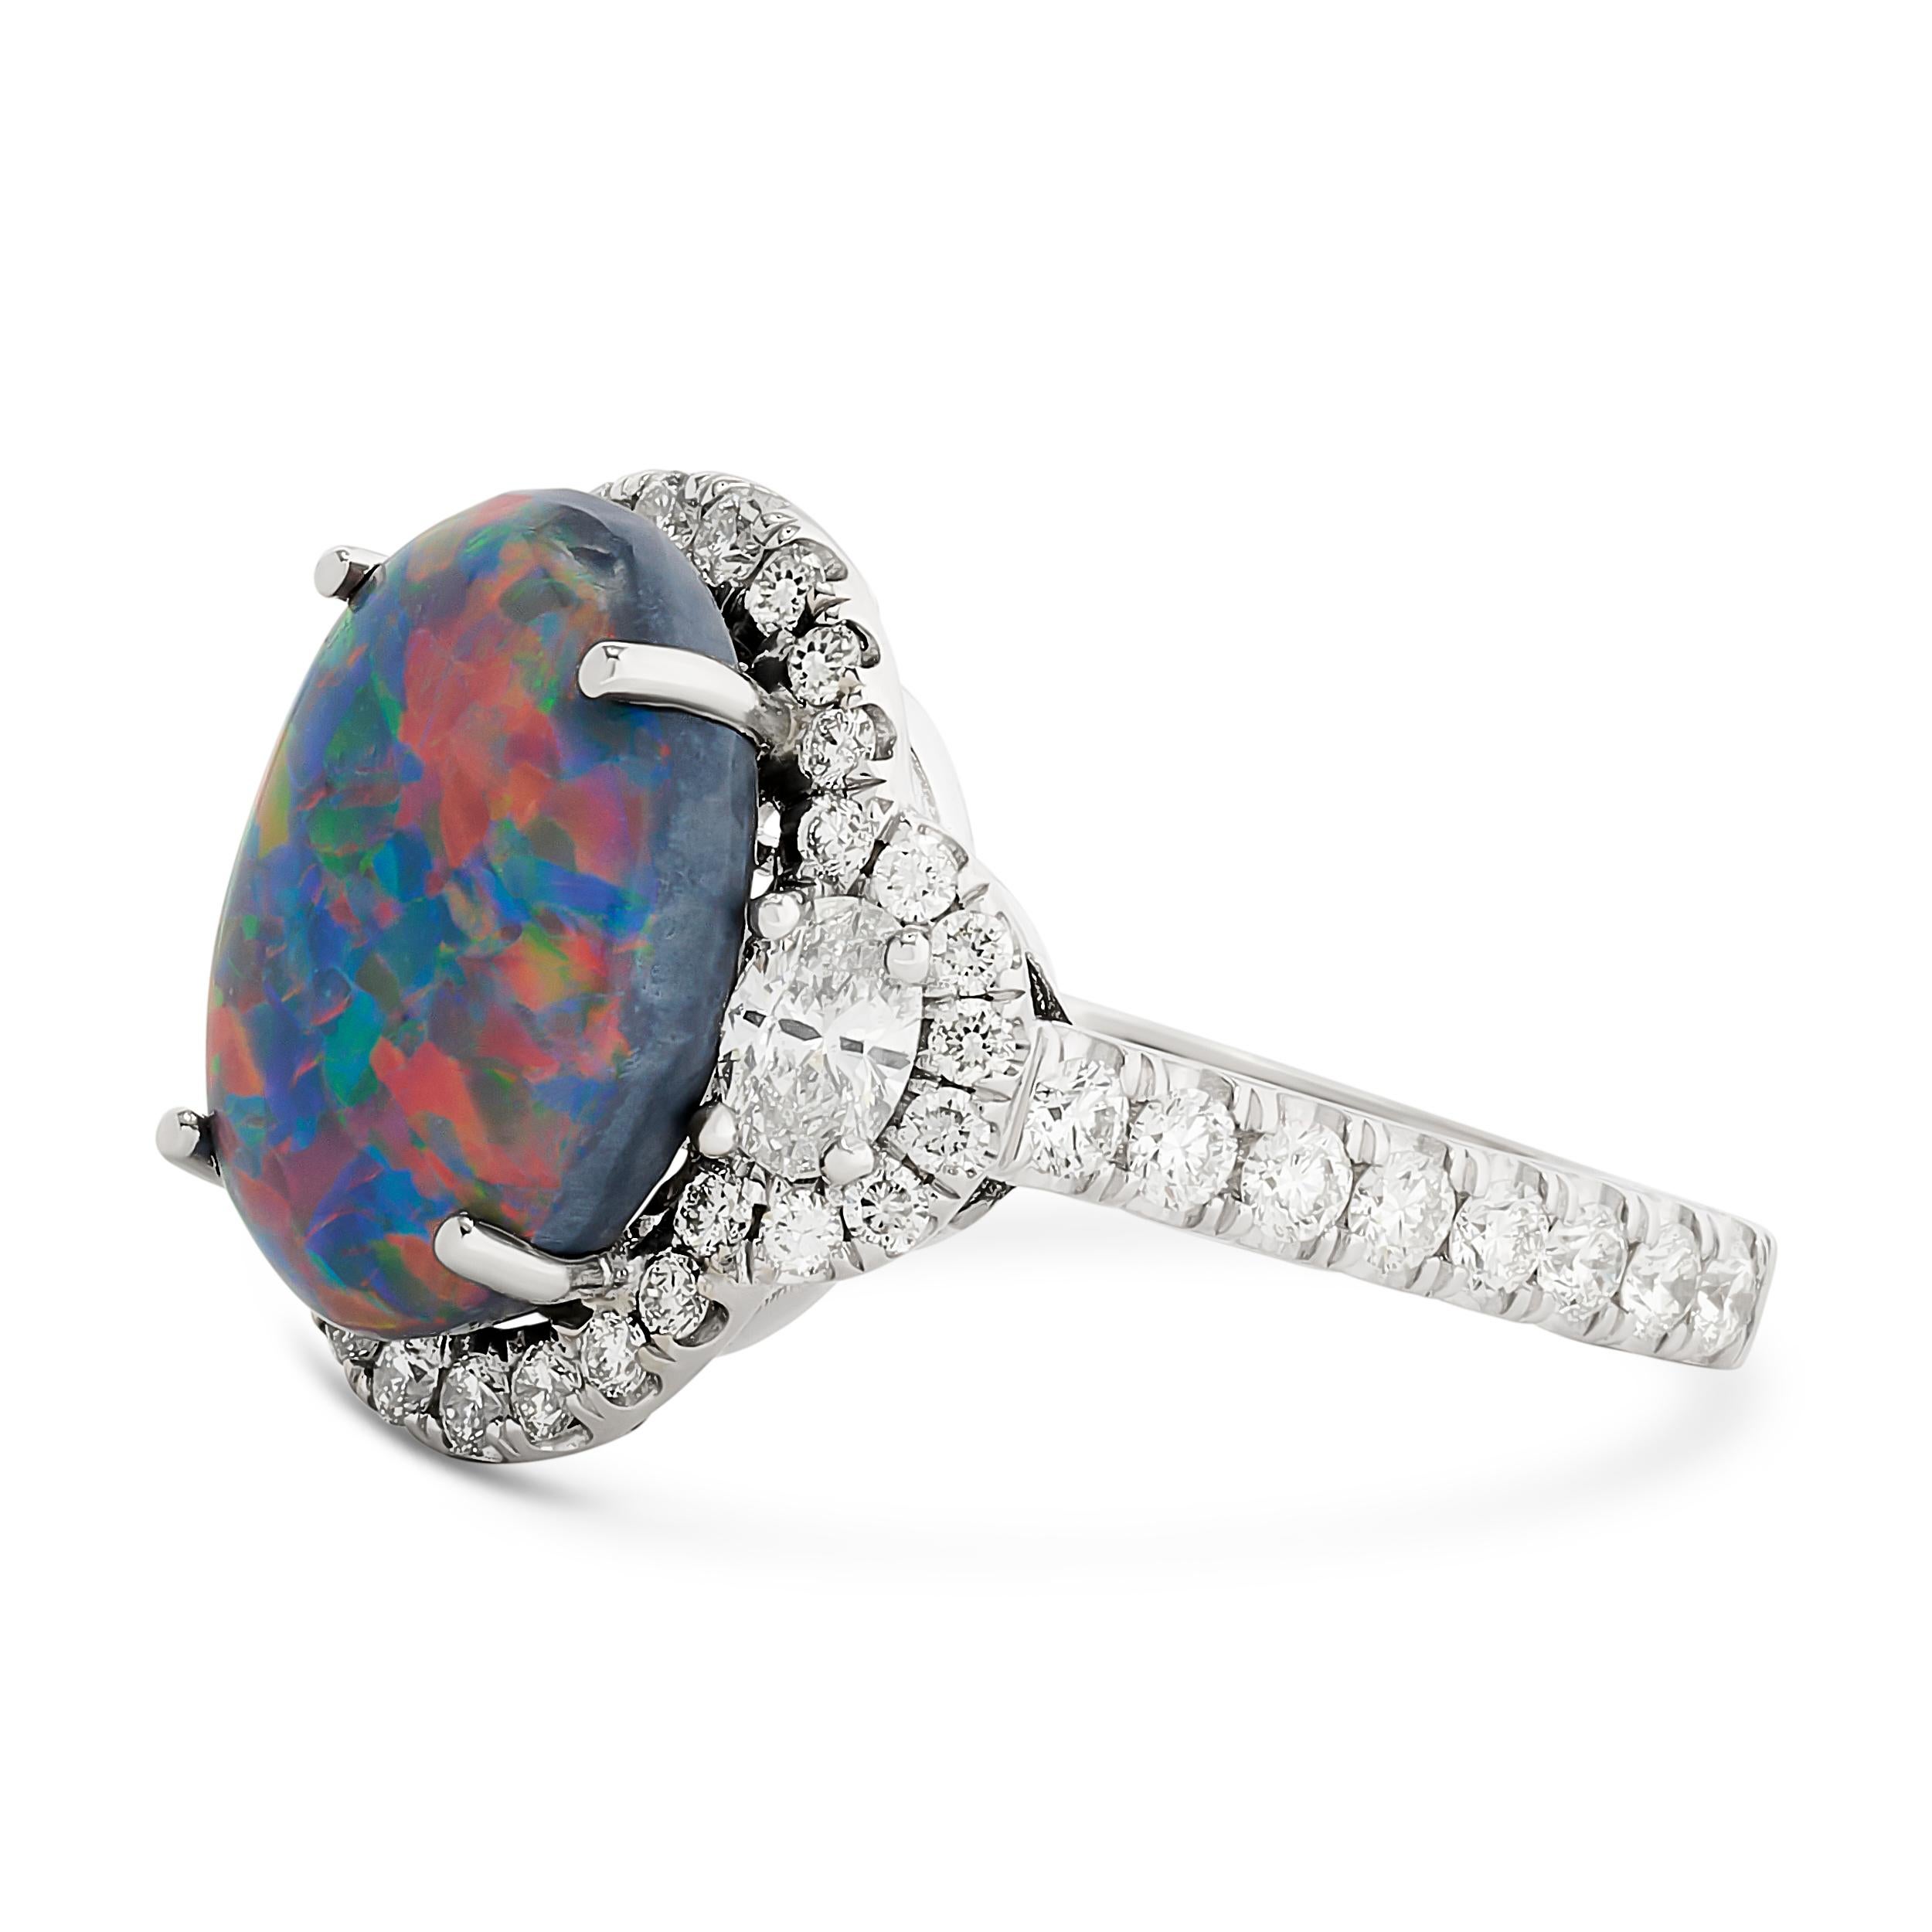 The exquisite black opal ring, adorned with shimmering diamonds, captivates with its mysterious beauty, casting a spell of elegance and intrigue. 
The center black opal weighs approximately 5.01 carats and is accompanied with a GIA Black, no